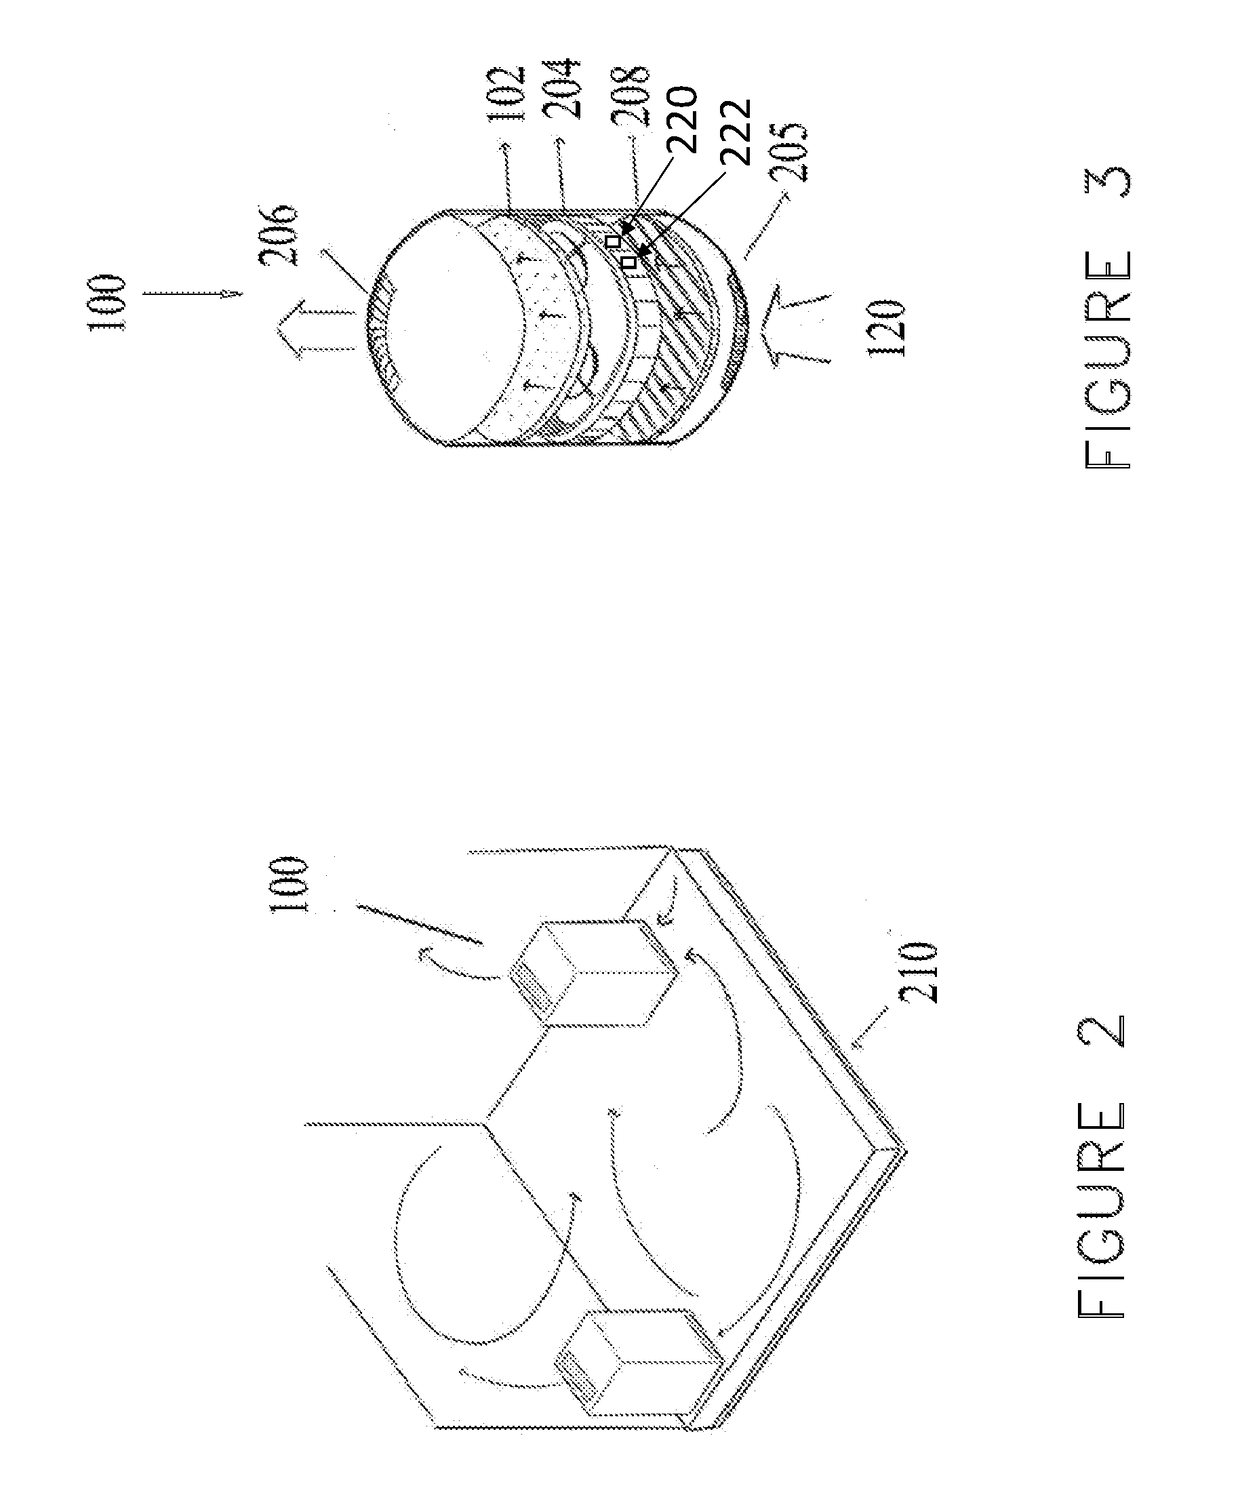 Method, devices and systems for radon removal from indoor areas